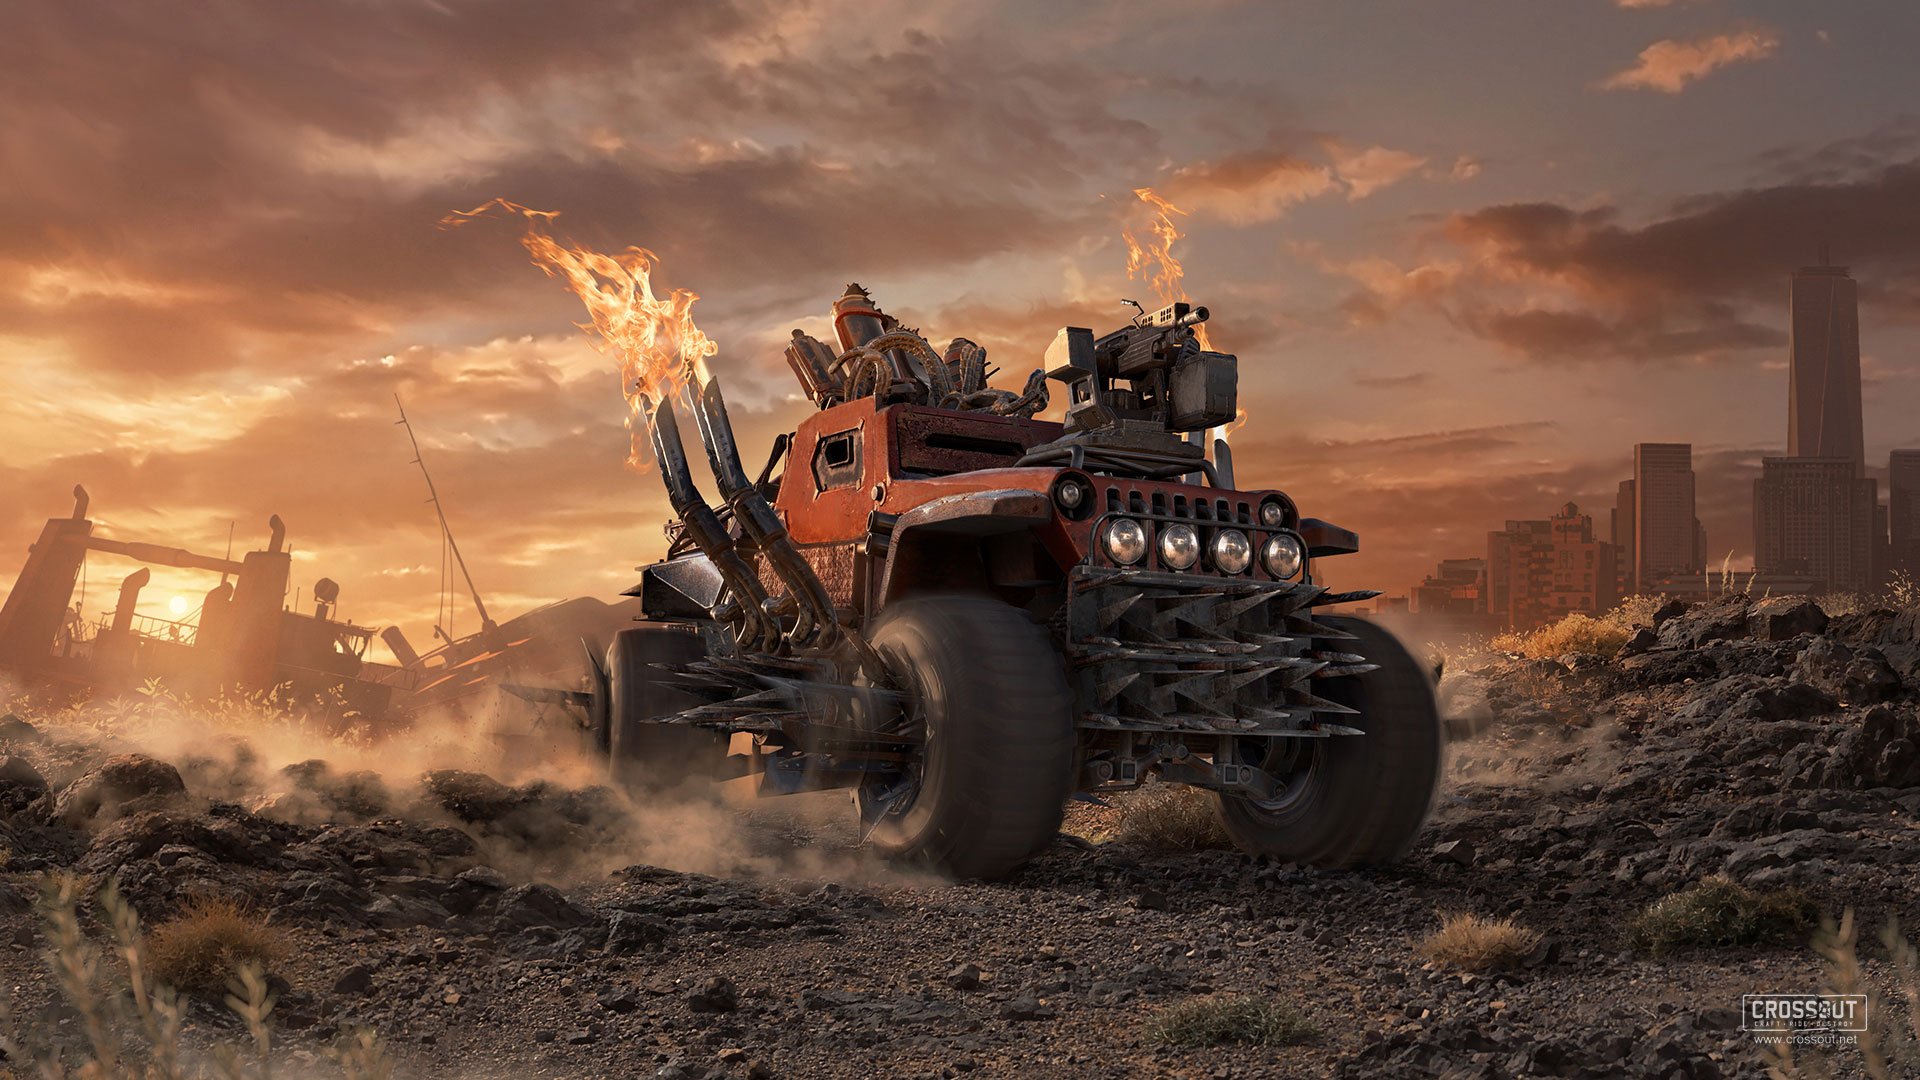 General 1920x1080 crossout video games car vehicle fire sunset glow sunset clouds